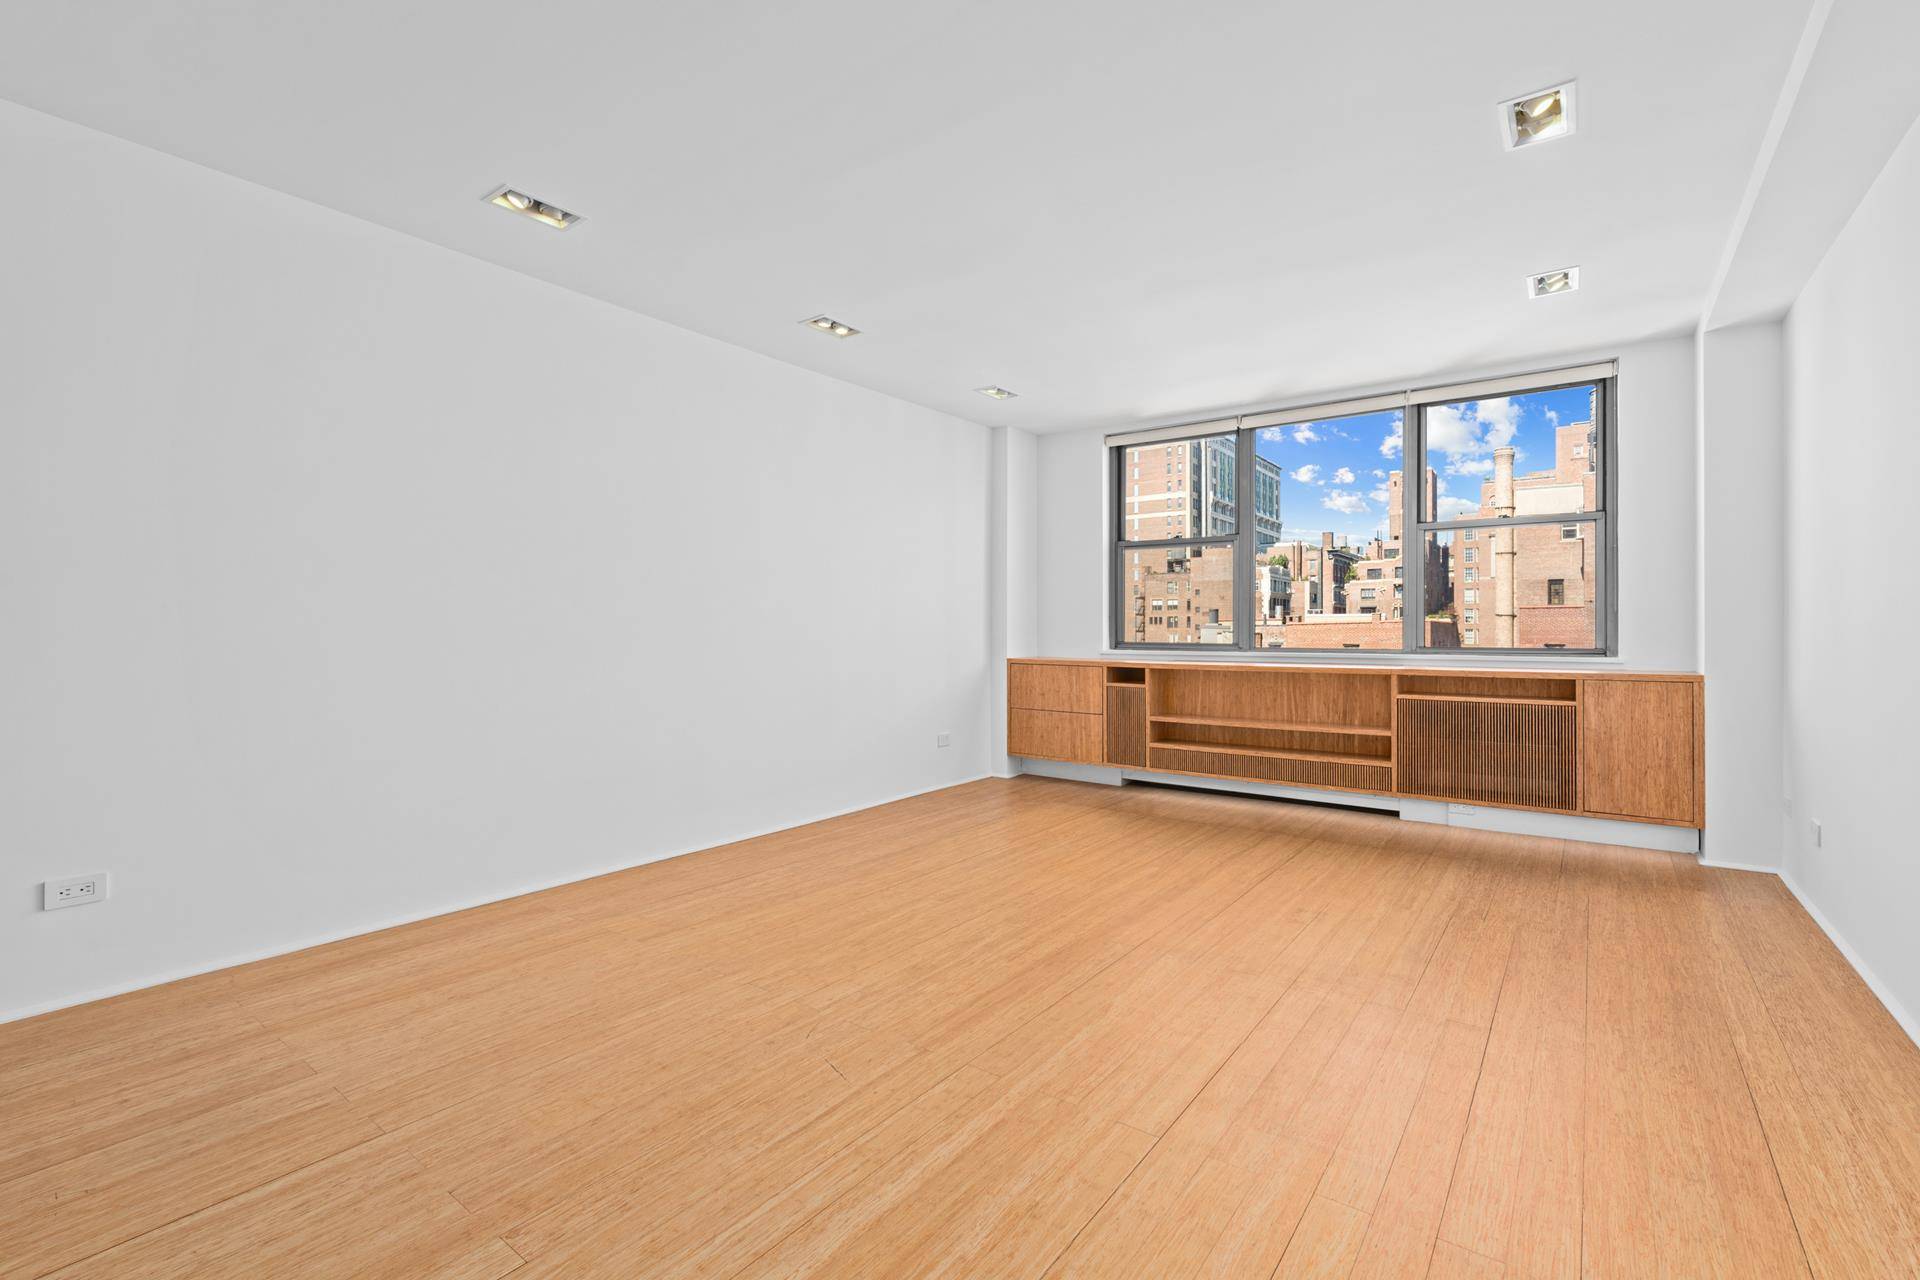 Jewel box apartment with full, open western views of the Midtown skyline and Gramercy Park, townhouse gardens and blue skies.